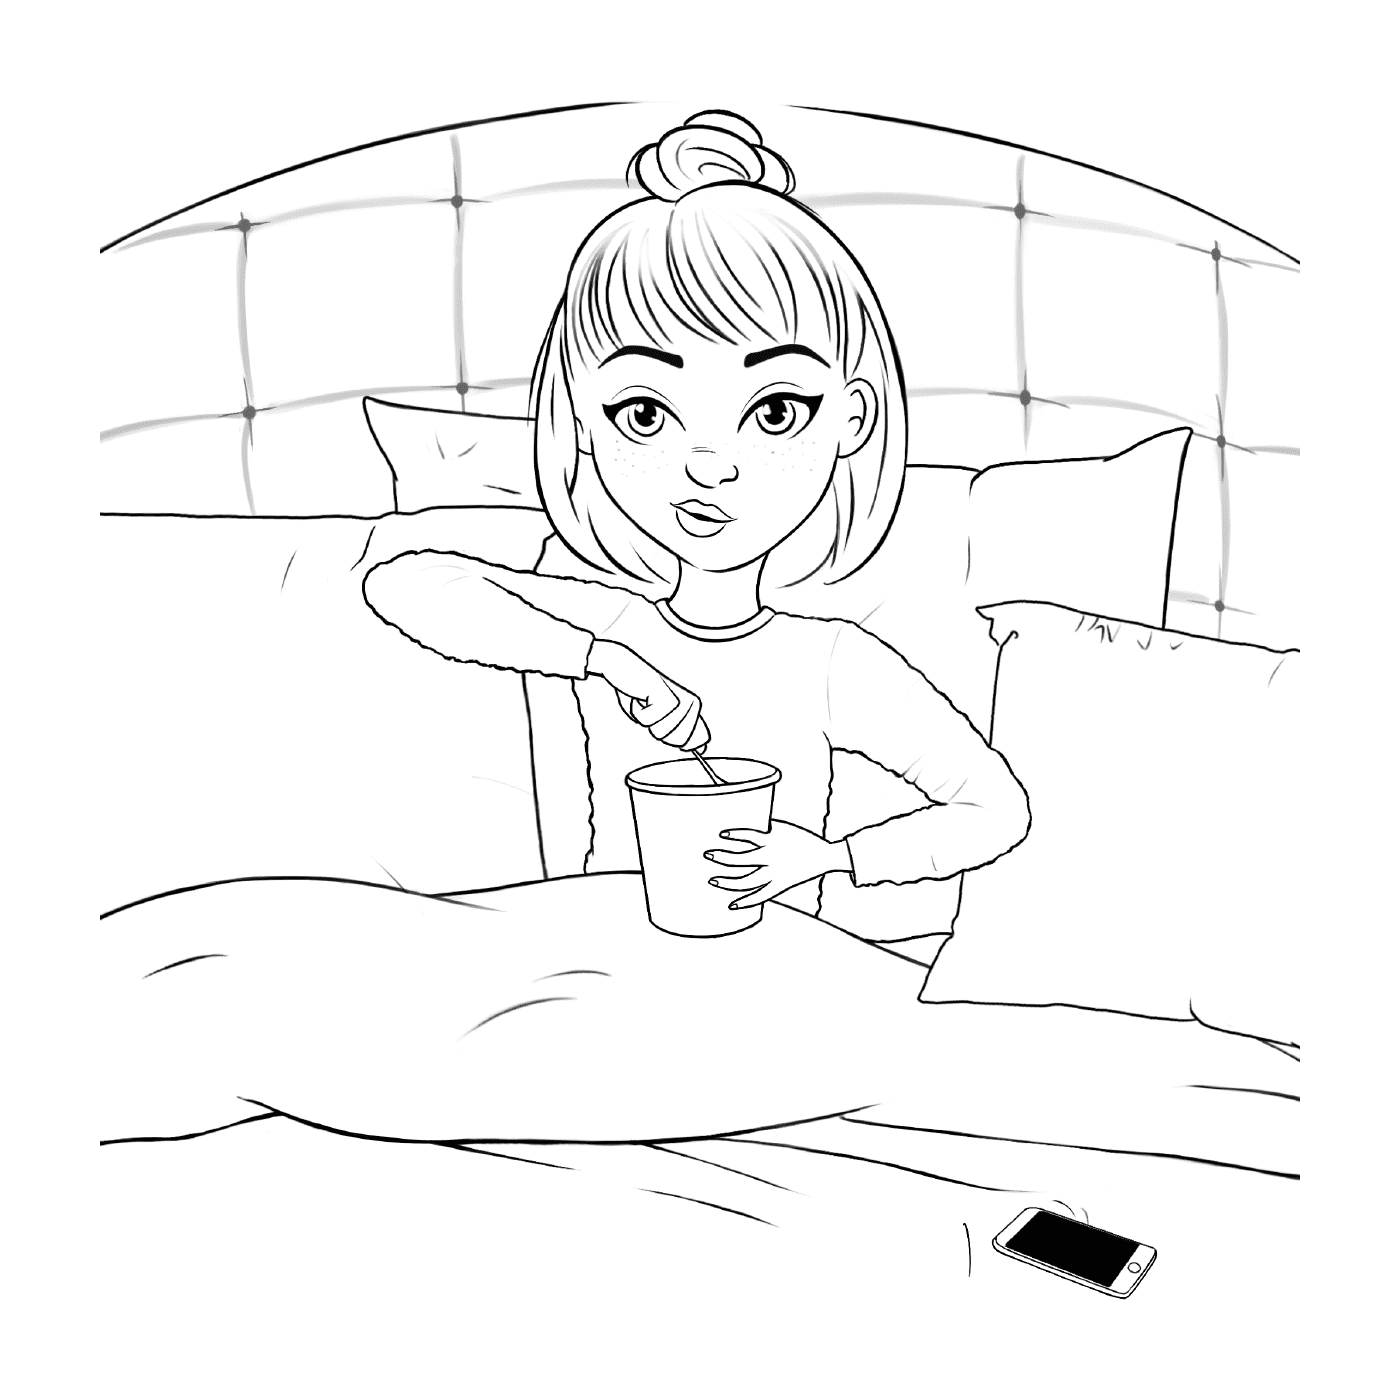  Teen girl in bed with ice cream 